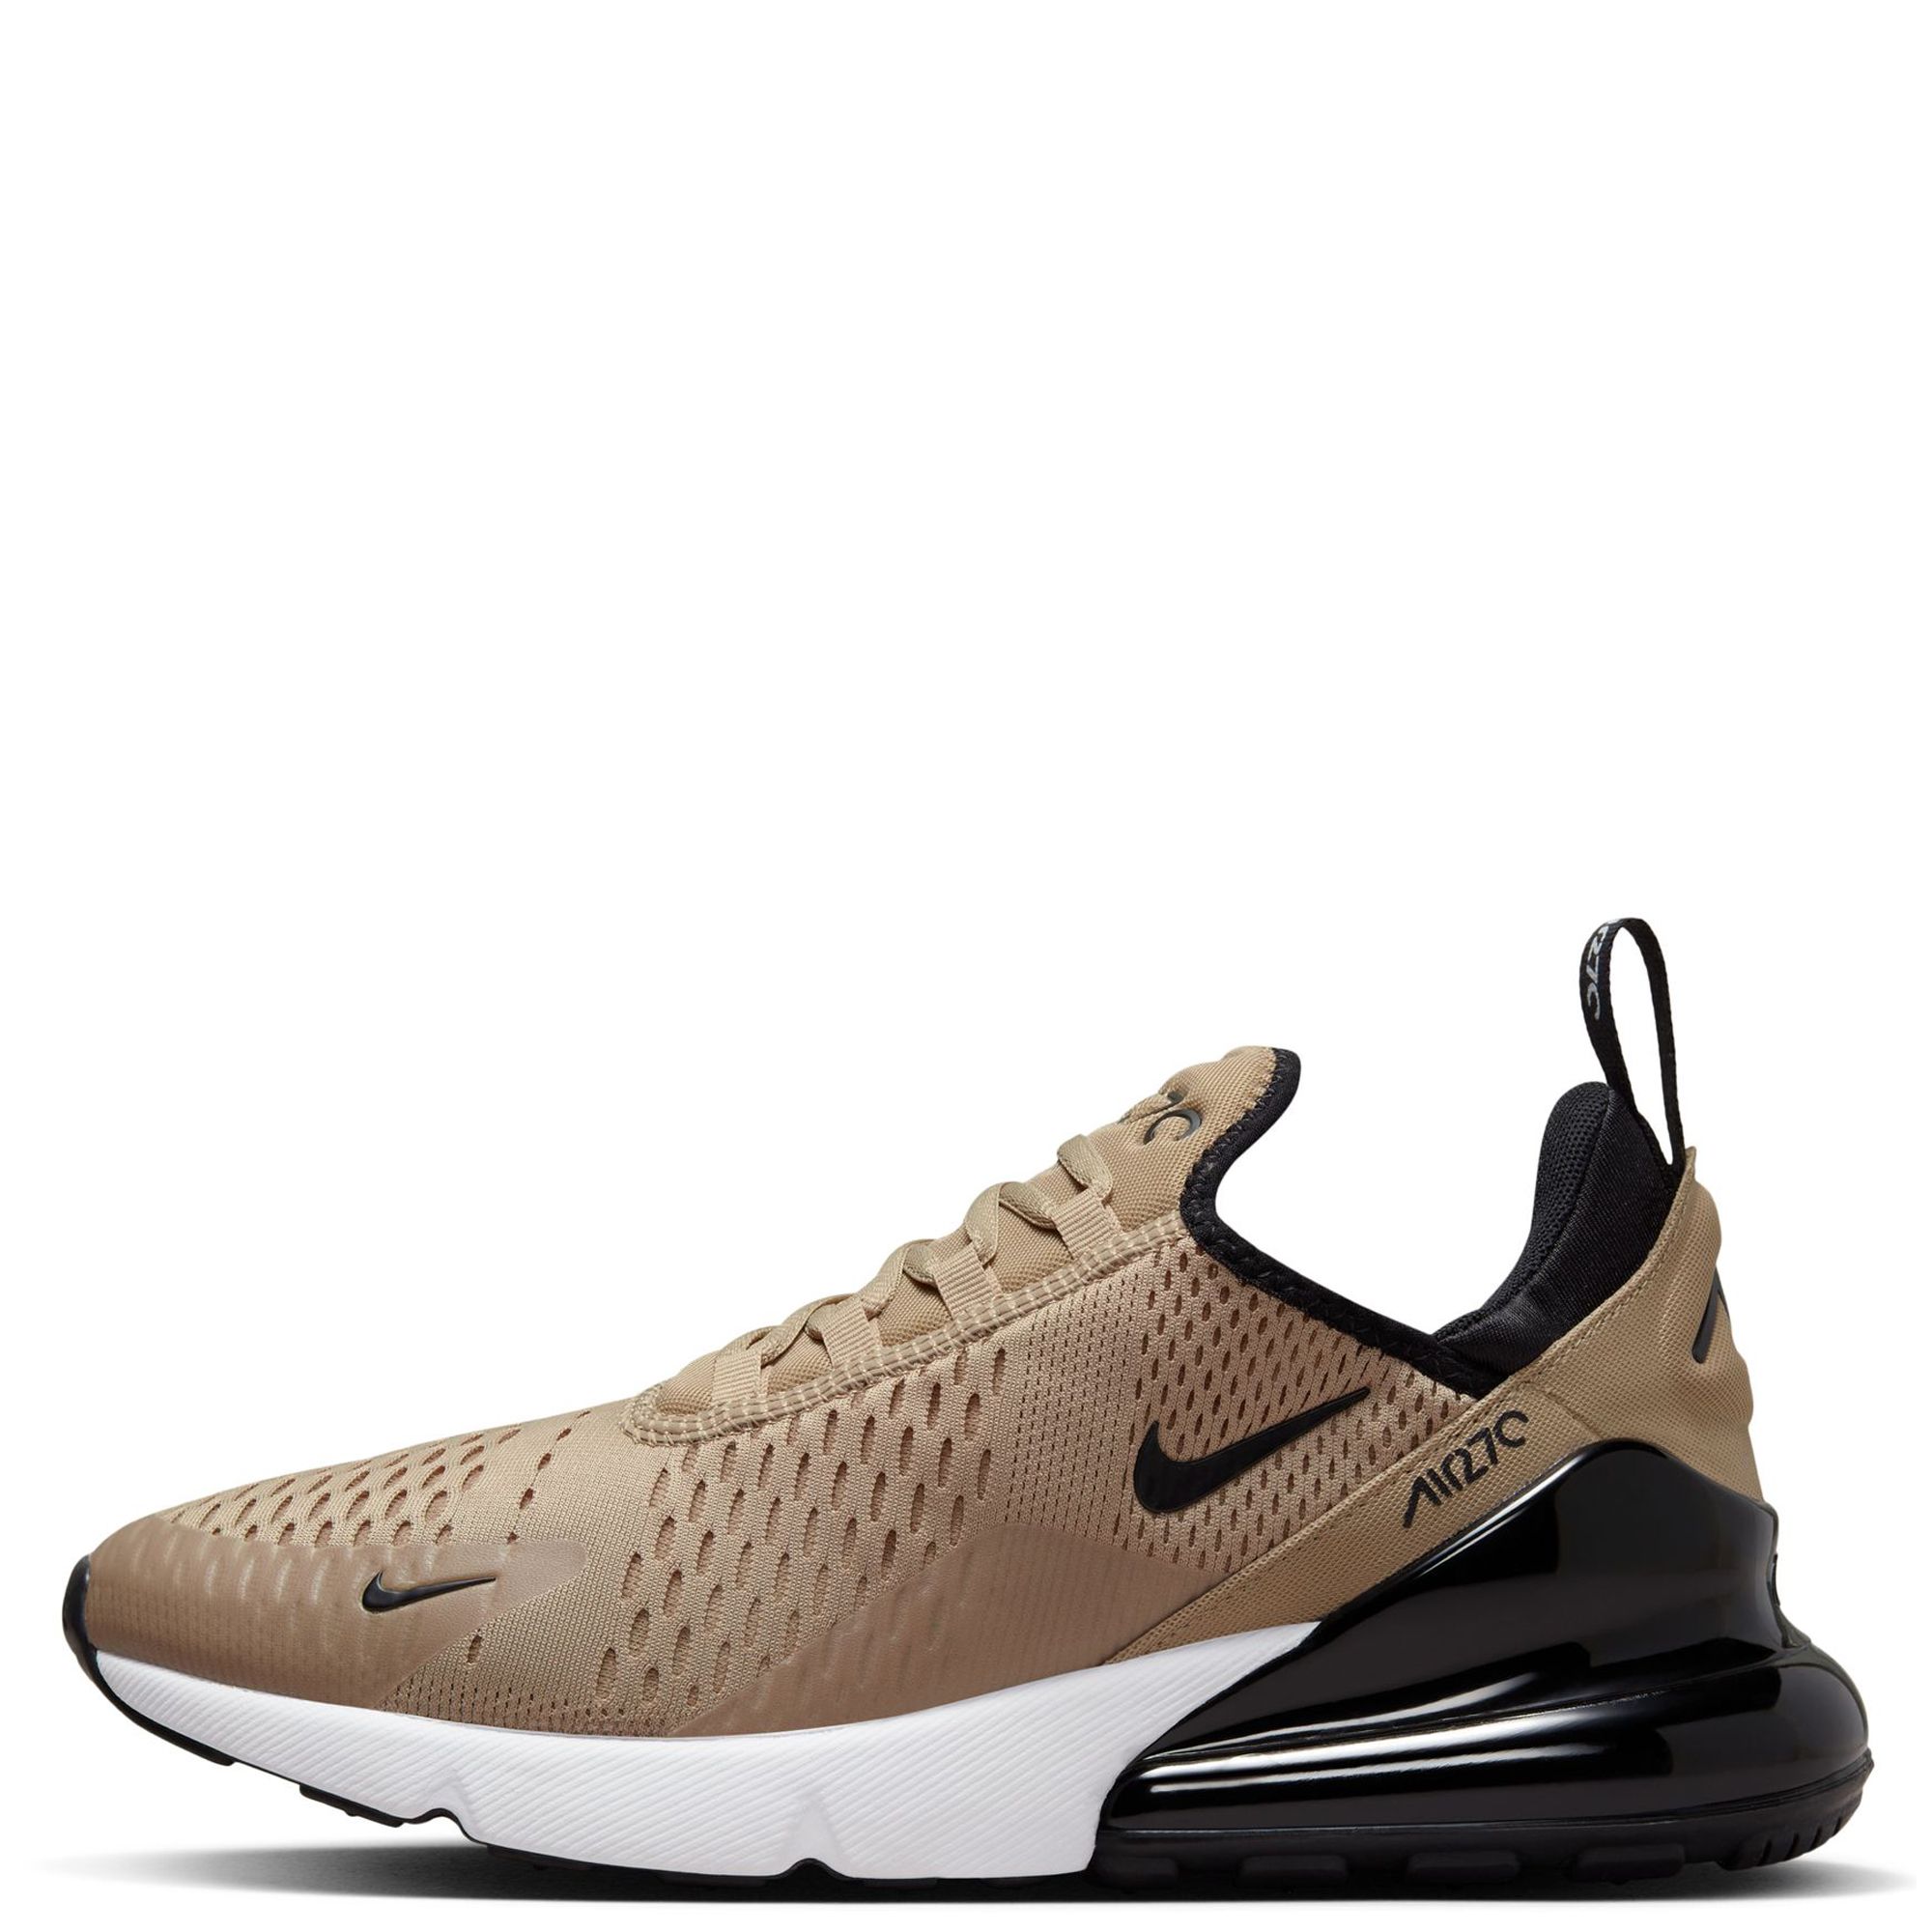 Nike Men's Air Max 270 Casual Shoes in Black/Black Size 10.5